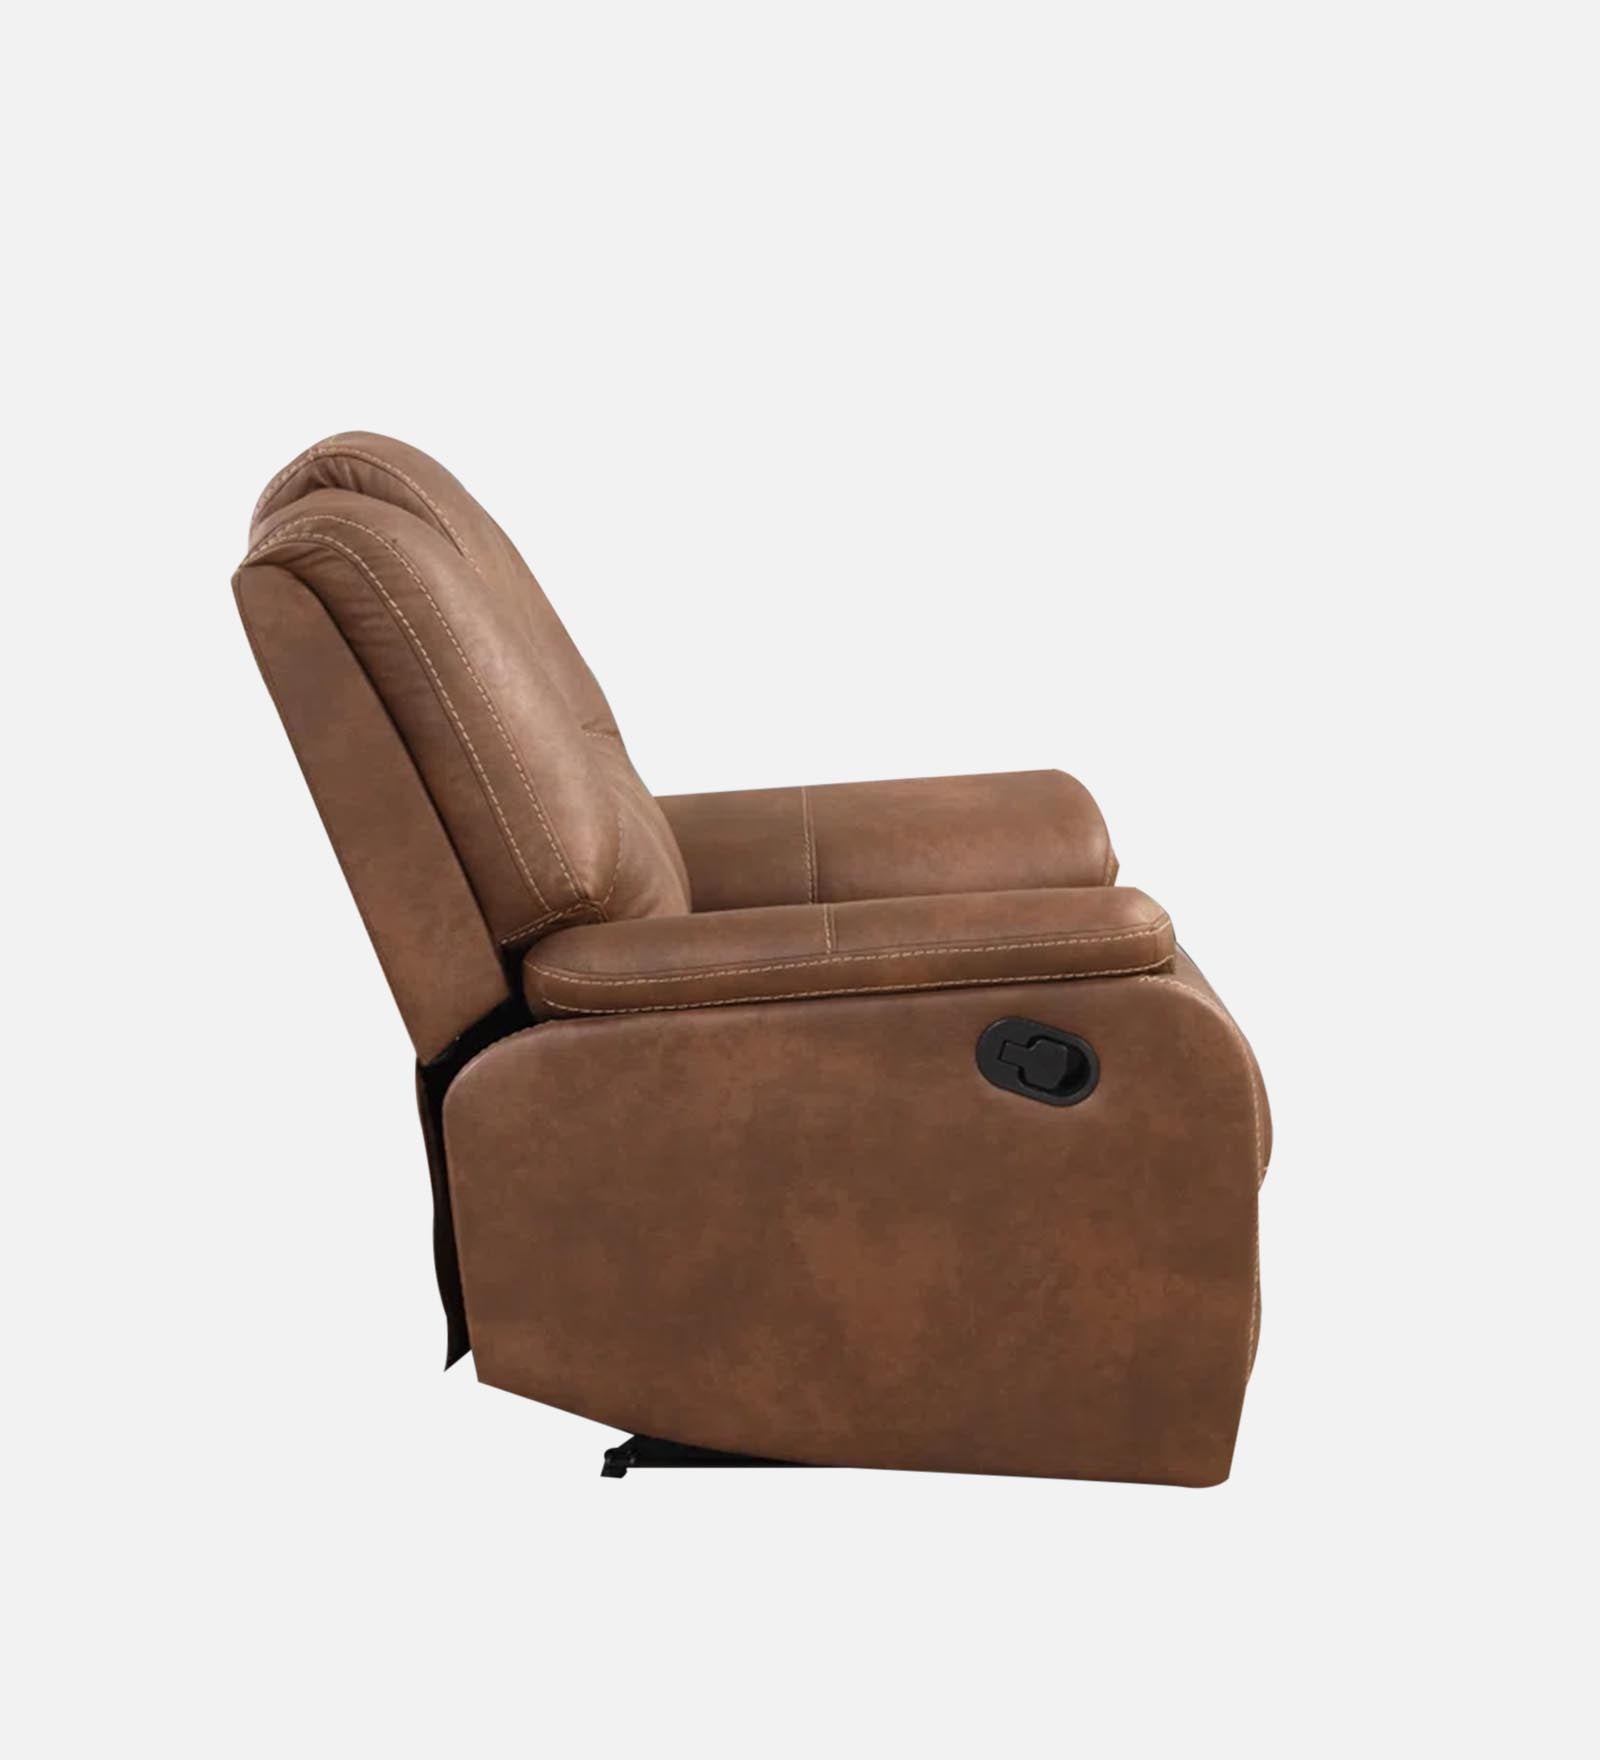 Dolpin Leather Manual 1 Seater Recliner In Clay-Brown Leather Finish